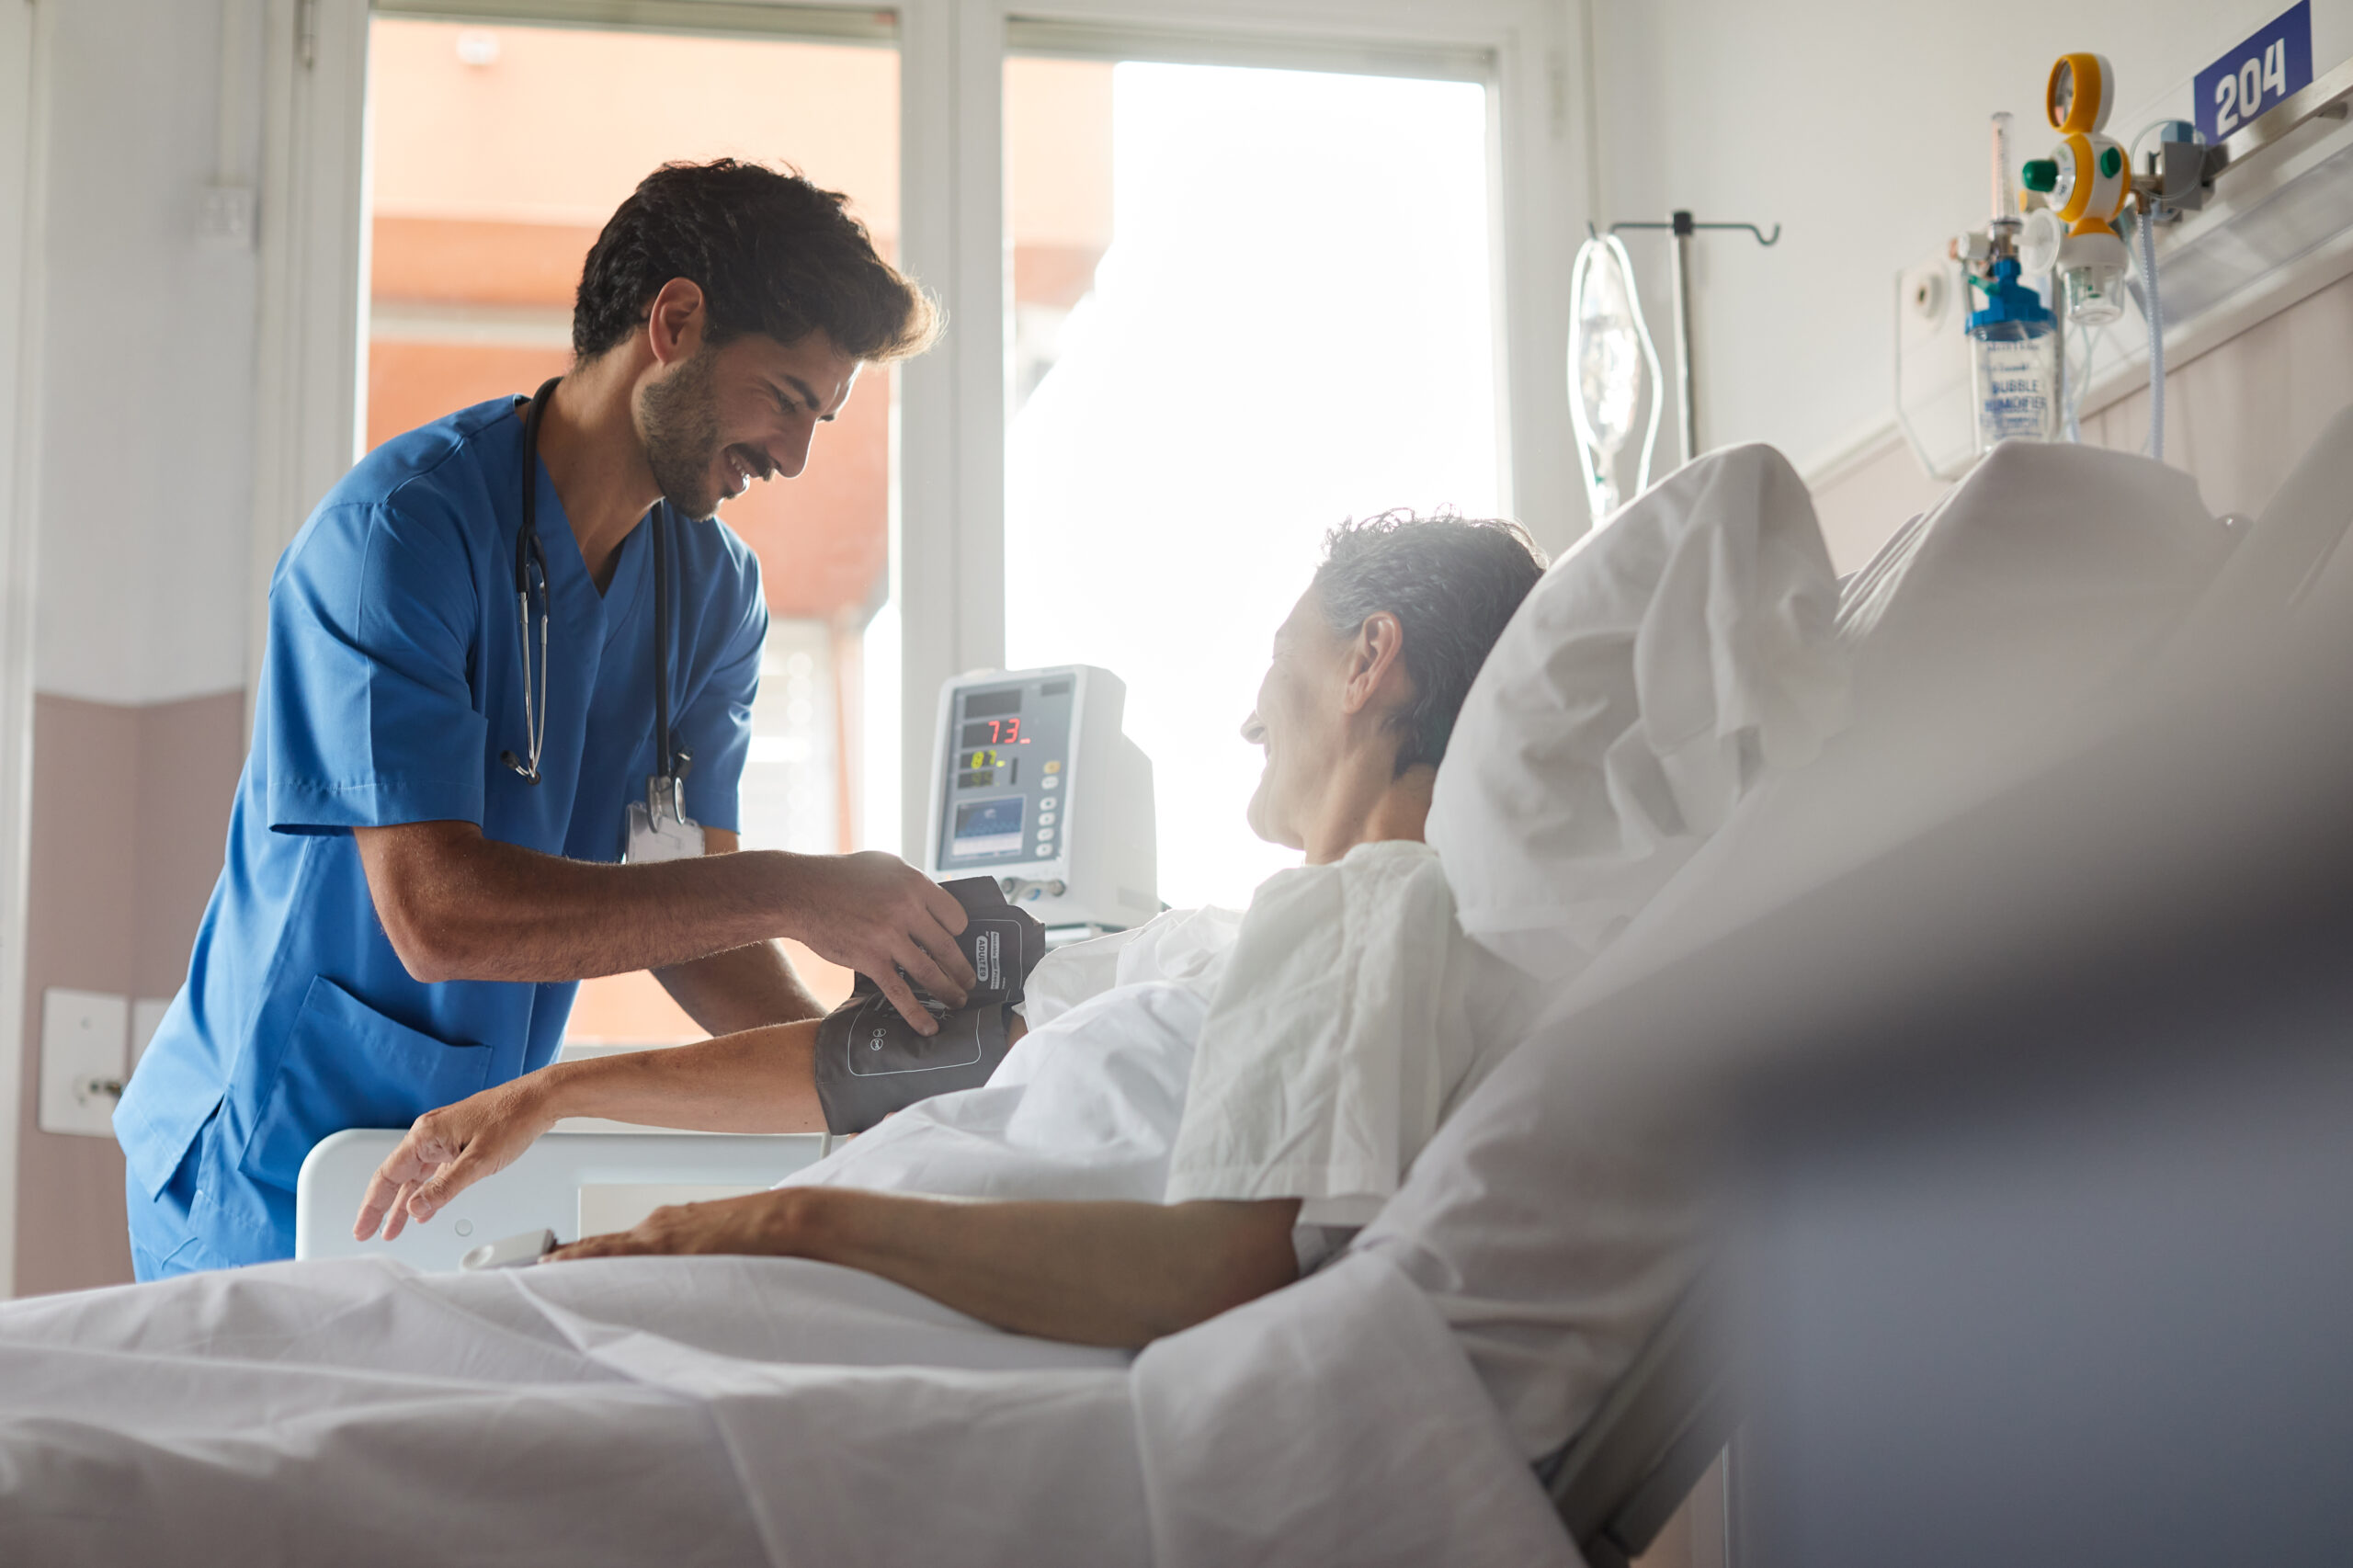 Nursing Technology Powered by RTLS Solutions Improves Patient Care.